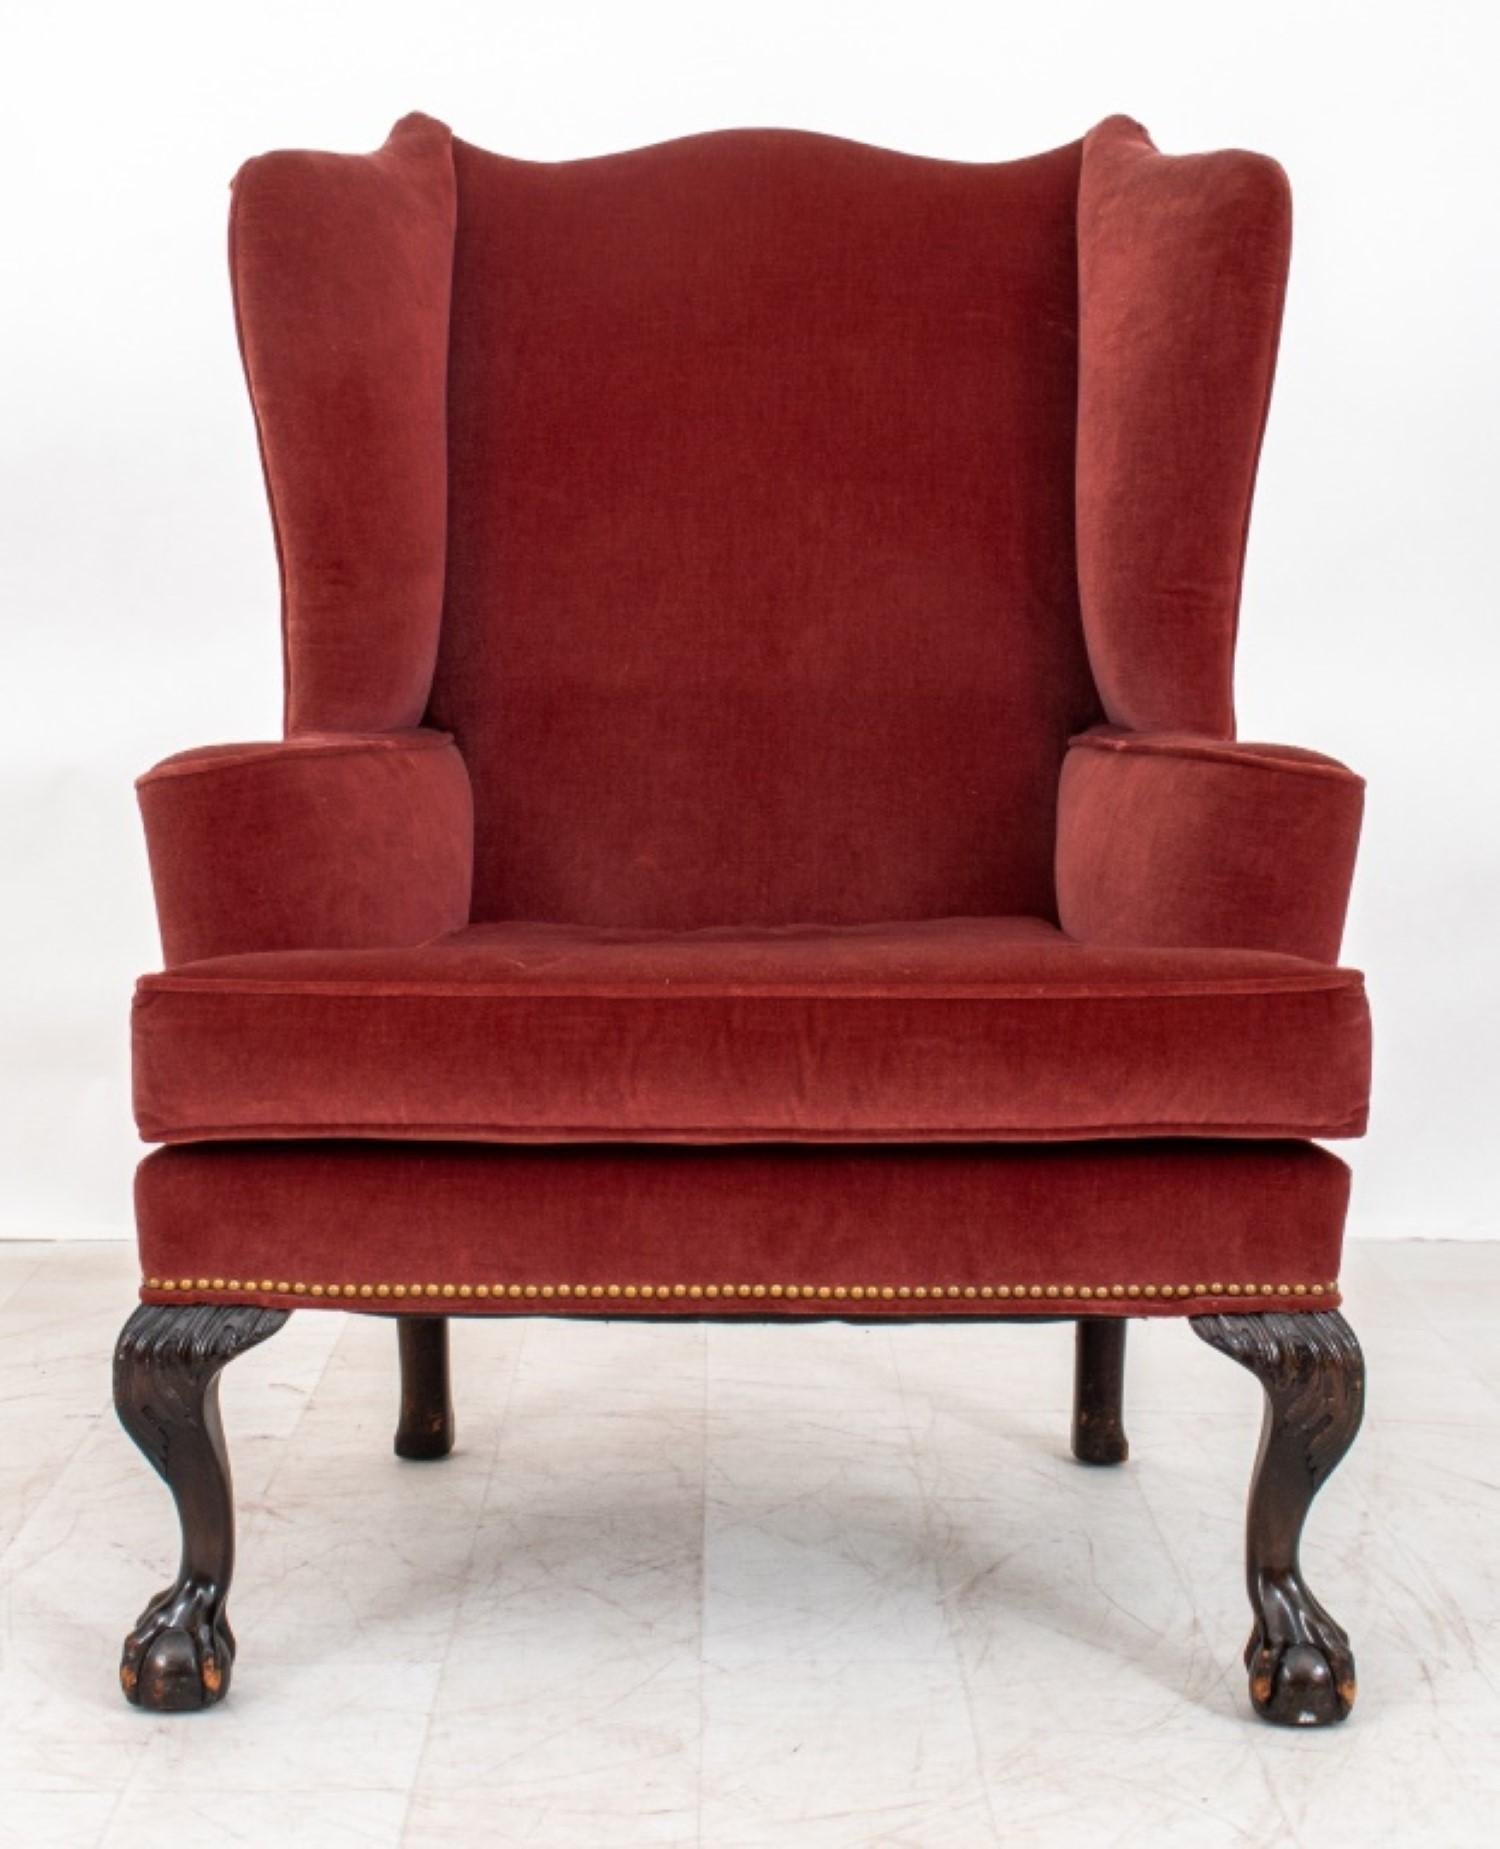 The George III style rose velvet upholstered wing chair stands on heavily carved acanthus claw and ball feet. It dates back to the 19th century or later. 

Dealer: S138XX